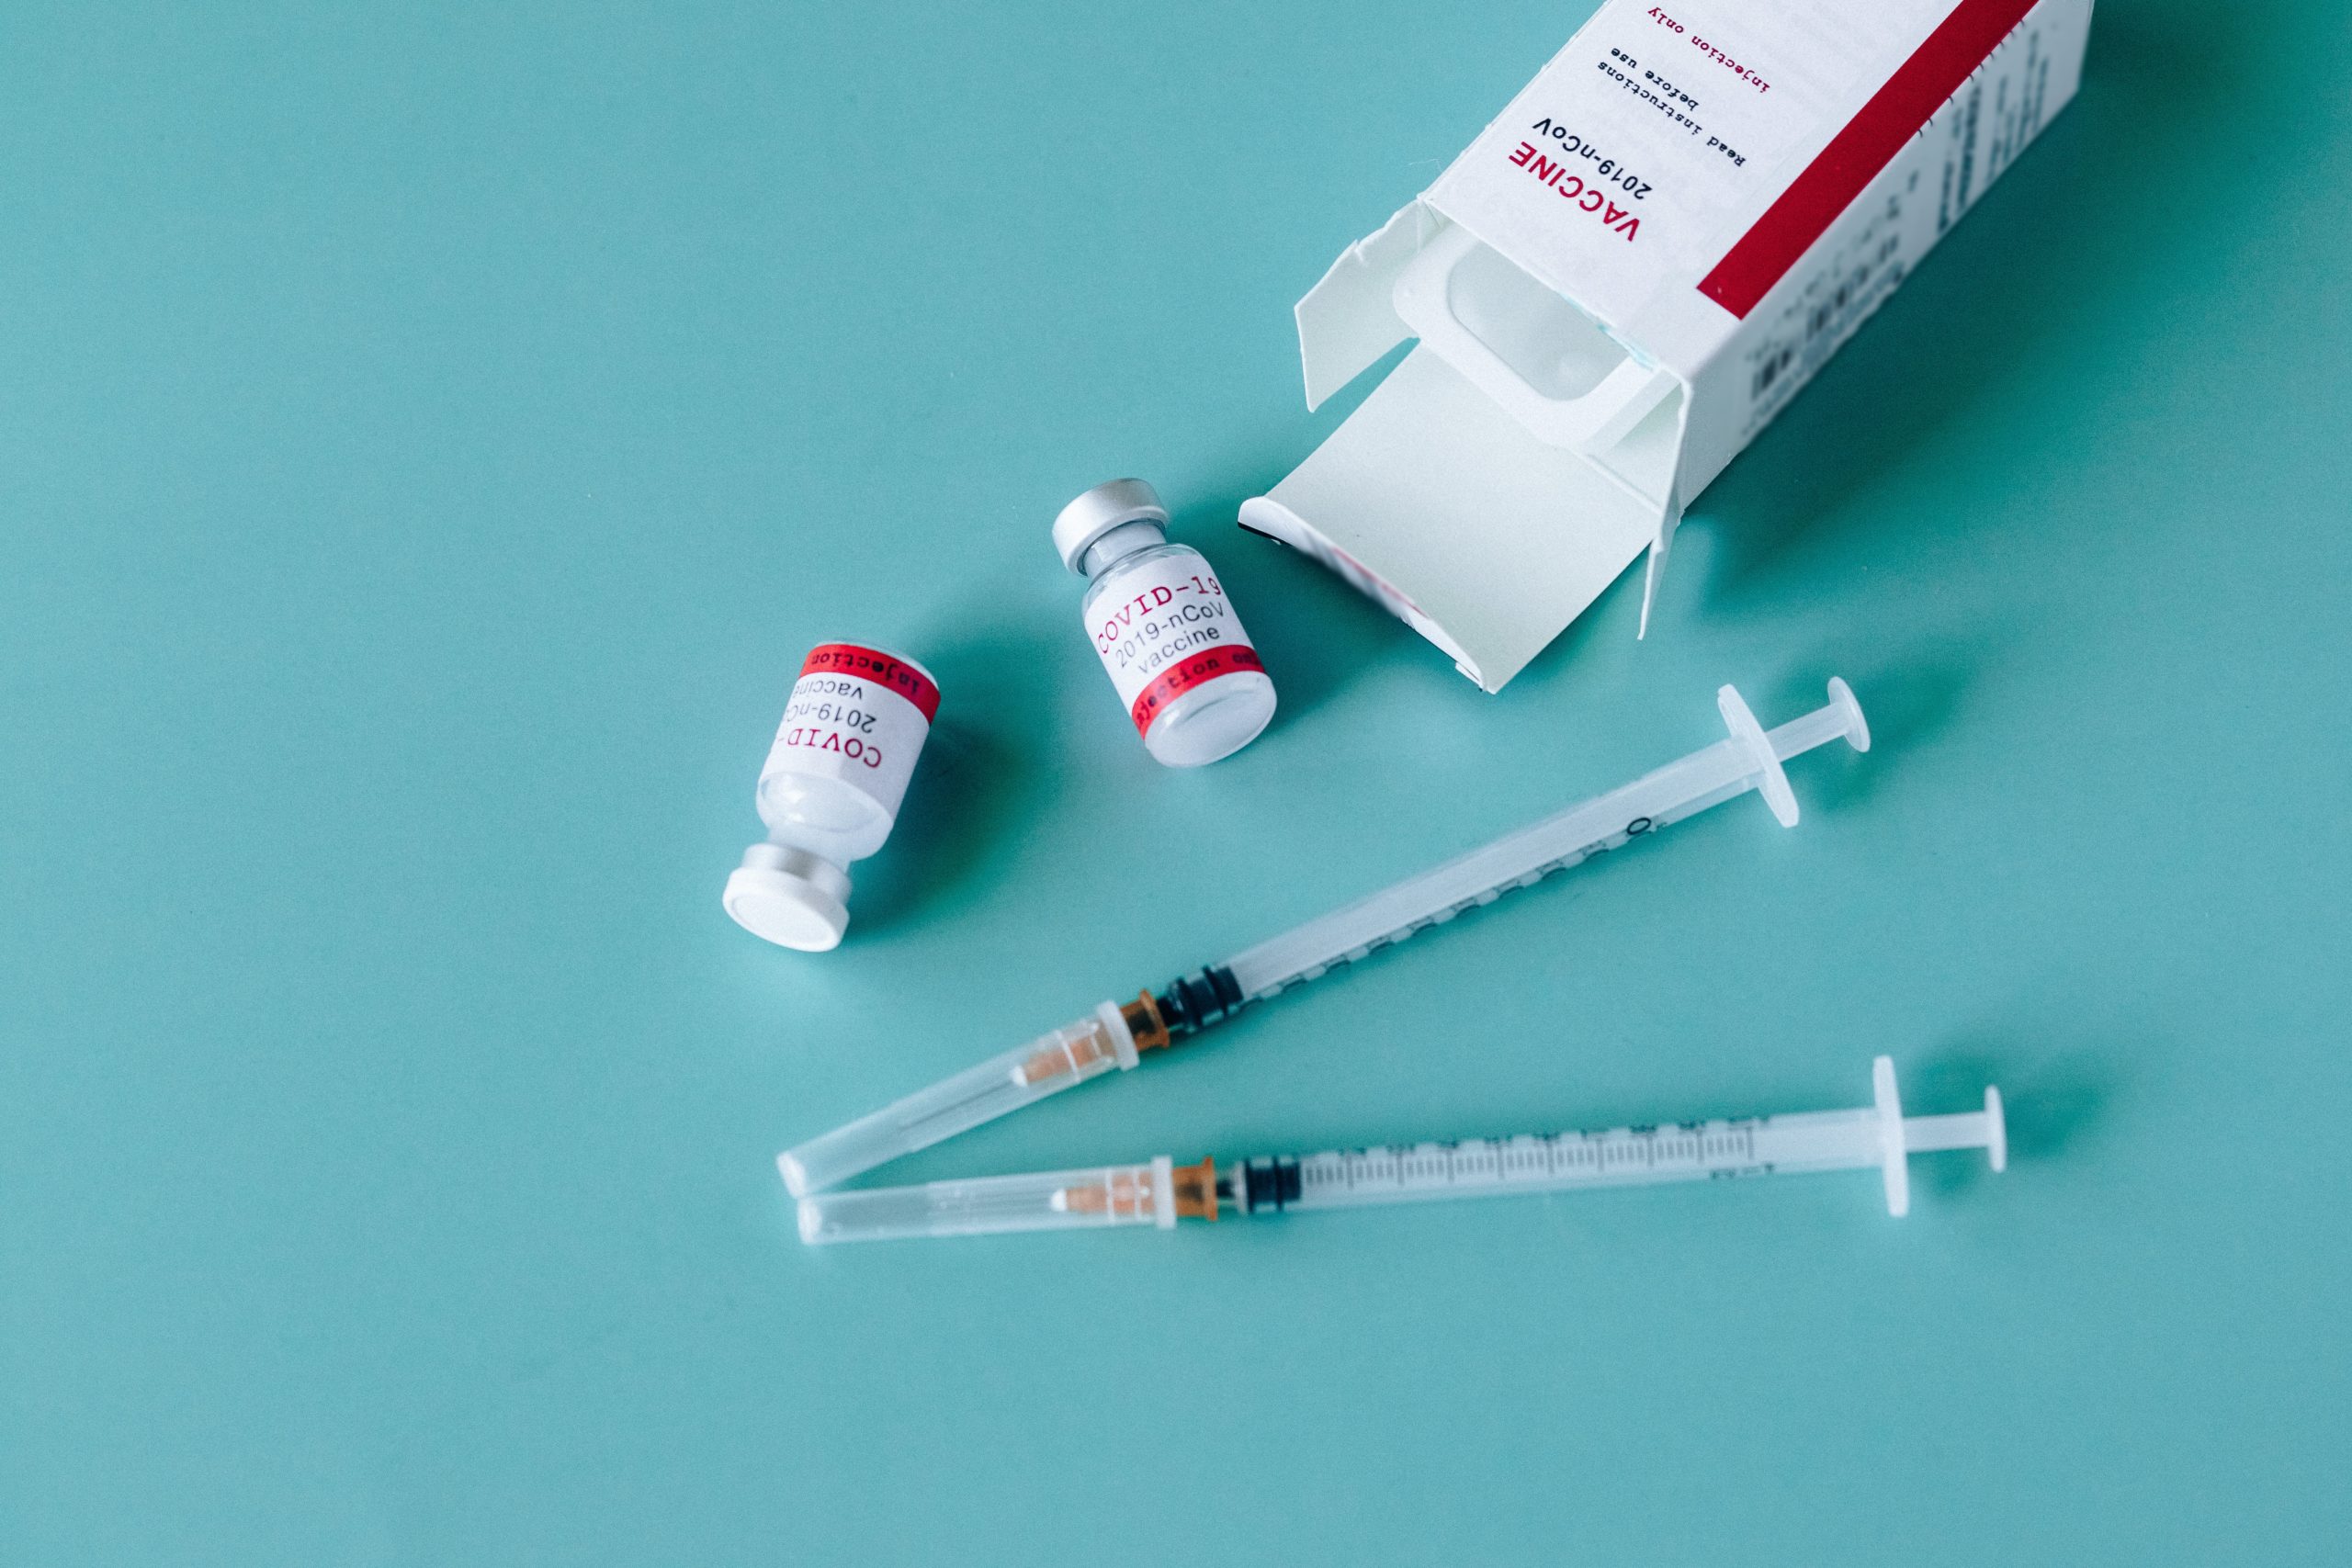 Can my employer force me to be vaccinated as part of my job?